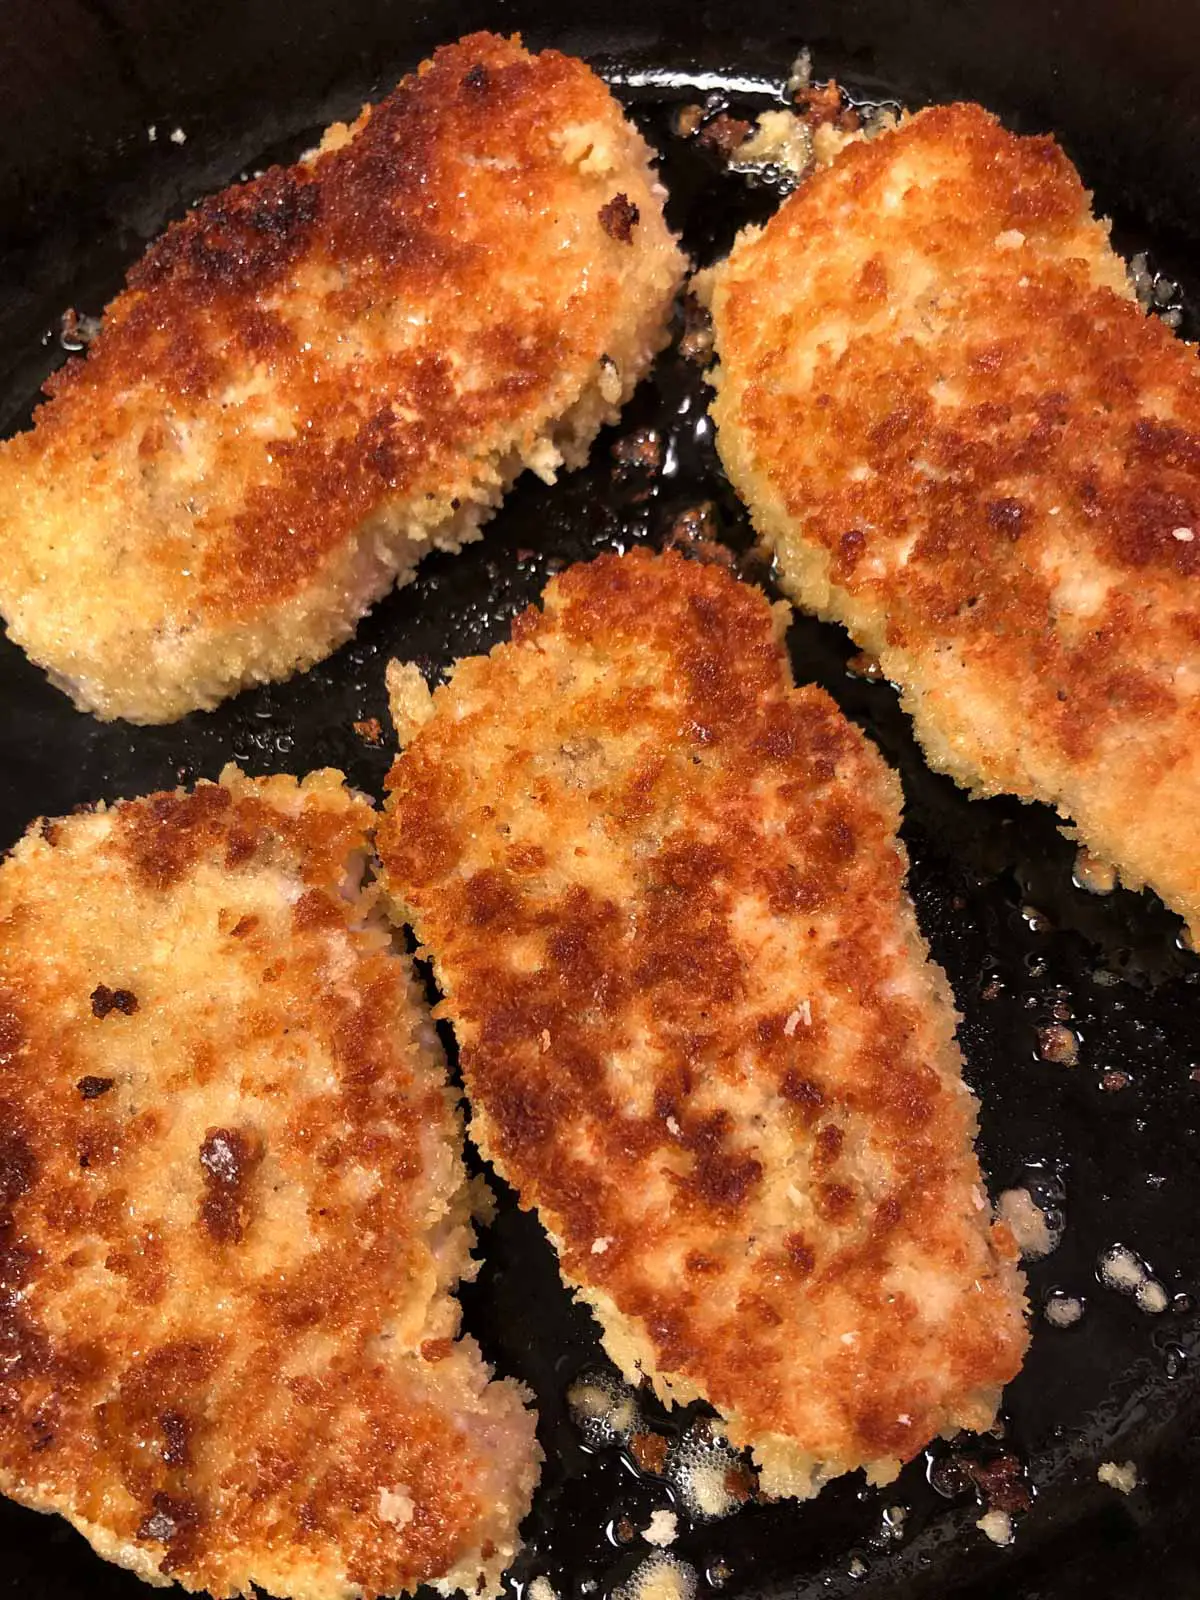 Four brown breaded pork chops frying in oil in a cast iron pan.